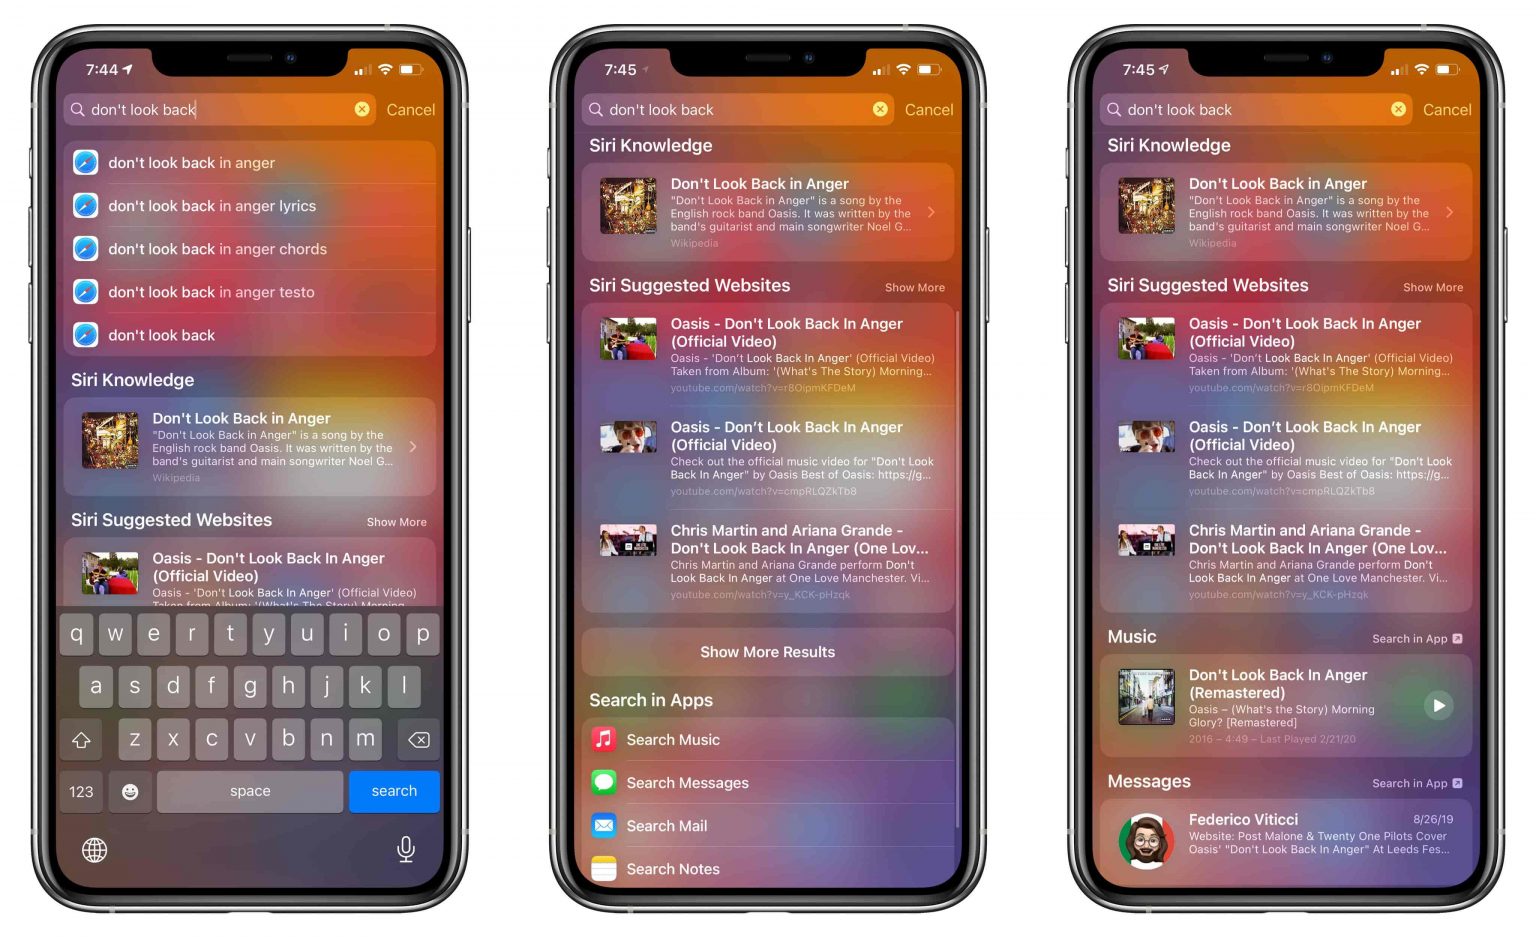 iOS-14-search-improved-1536×937